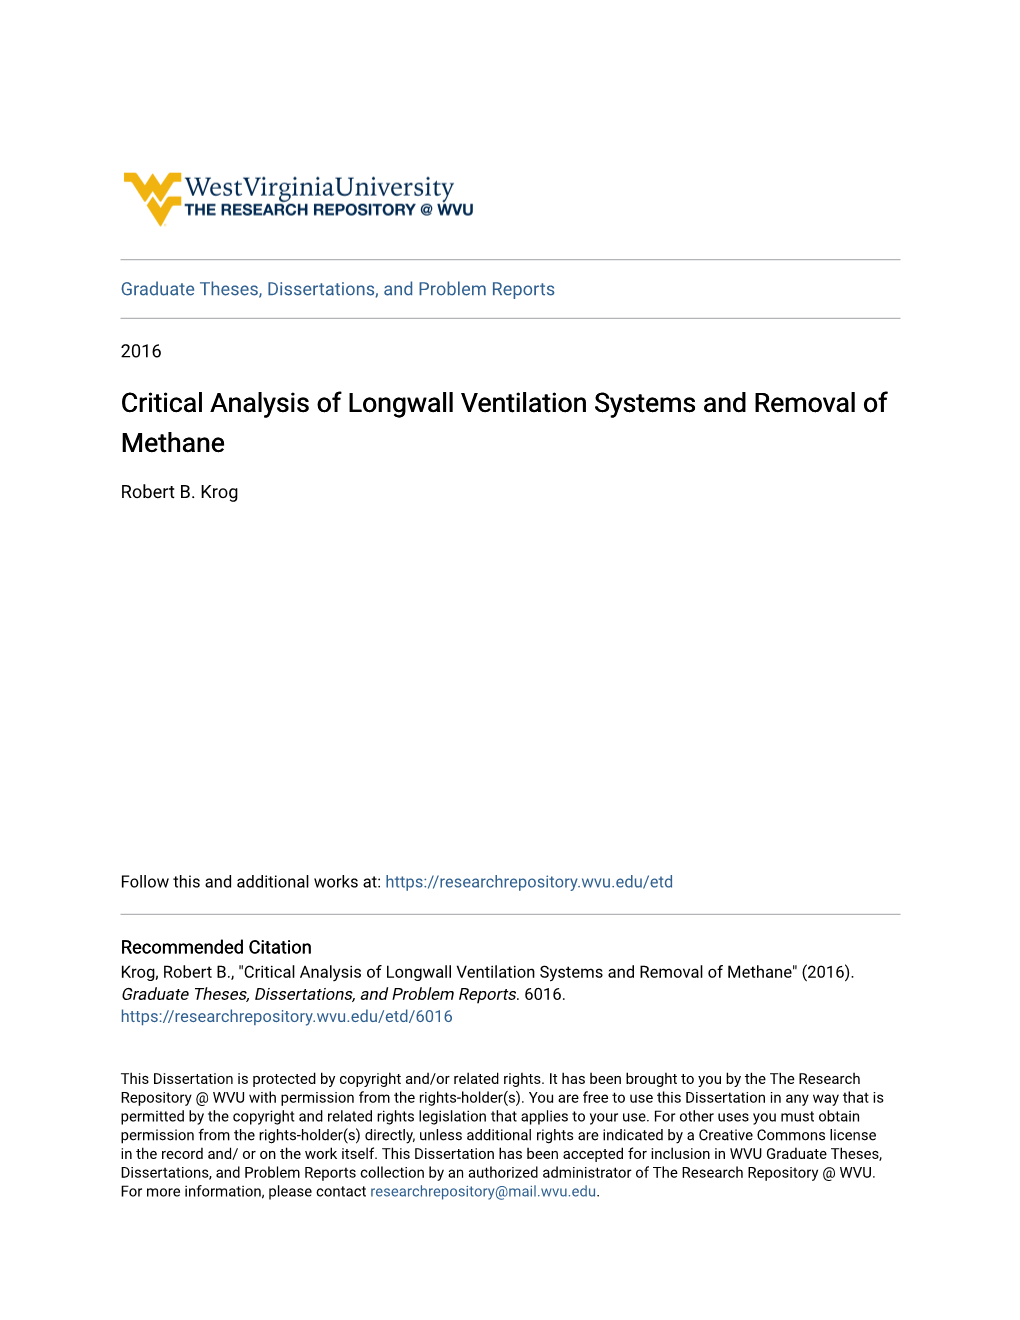 Critical Analysis of Longwall Ventilation Systems and Removal of Methane